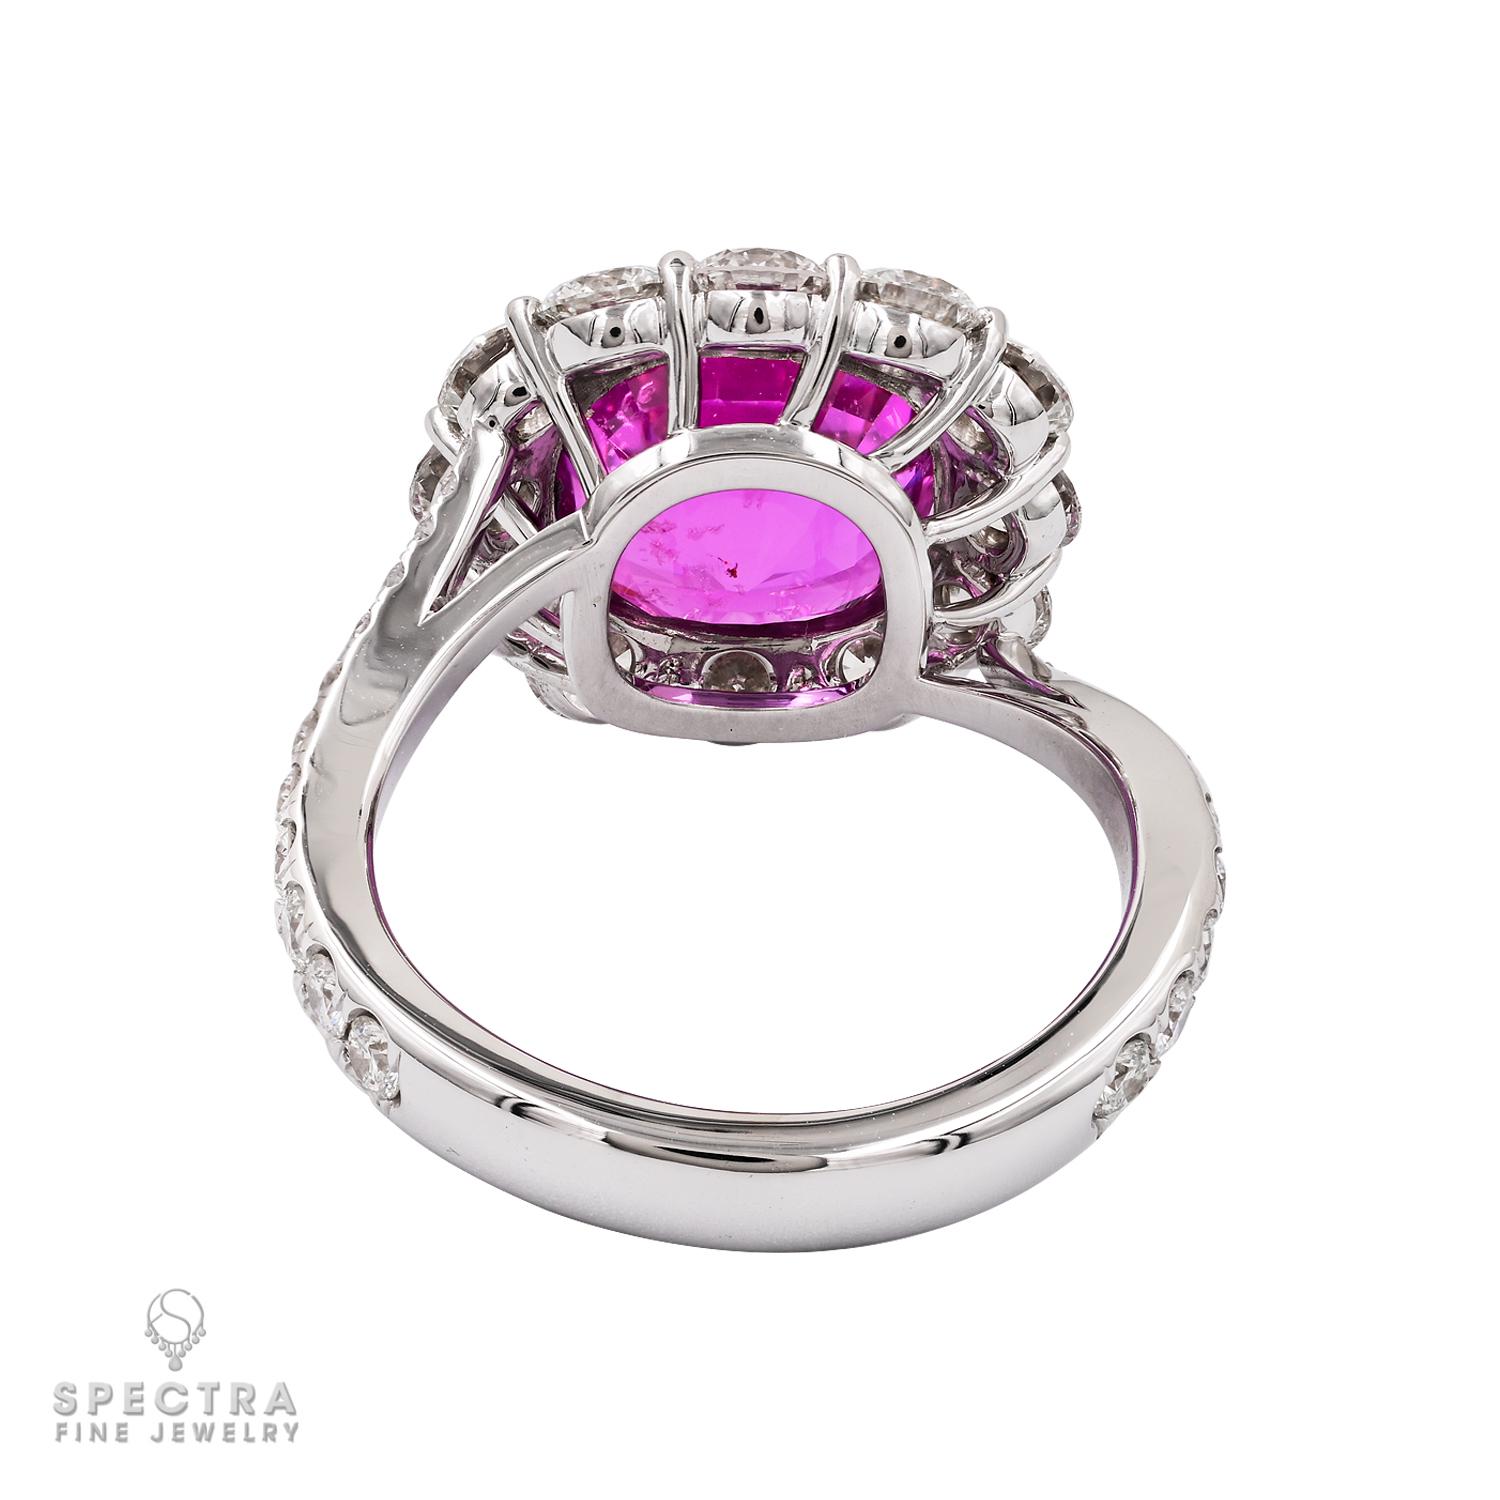 Contemporary Spectra Fine Jewelry GRS Certified 7.08 carat Cushion Pink Sapphire Ring For Sale